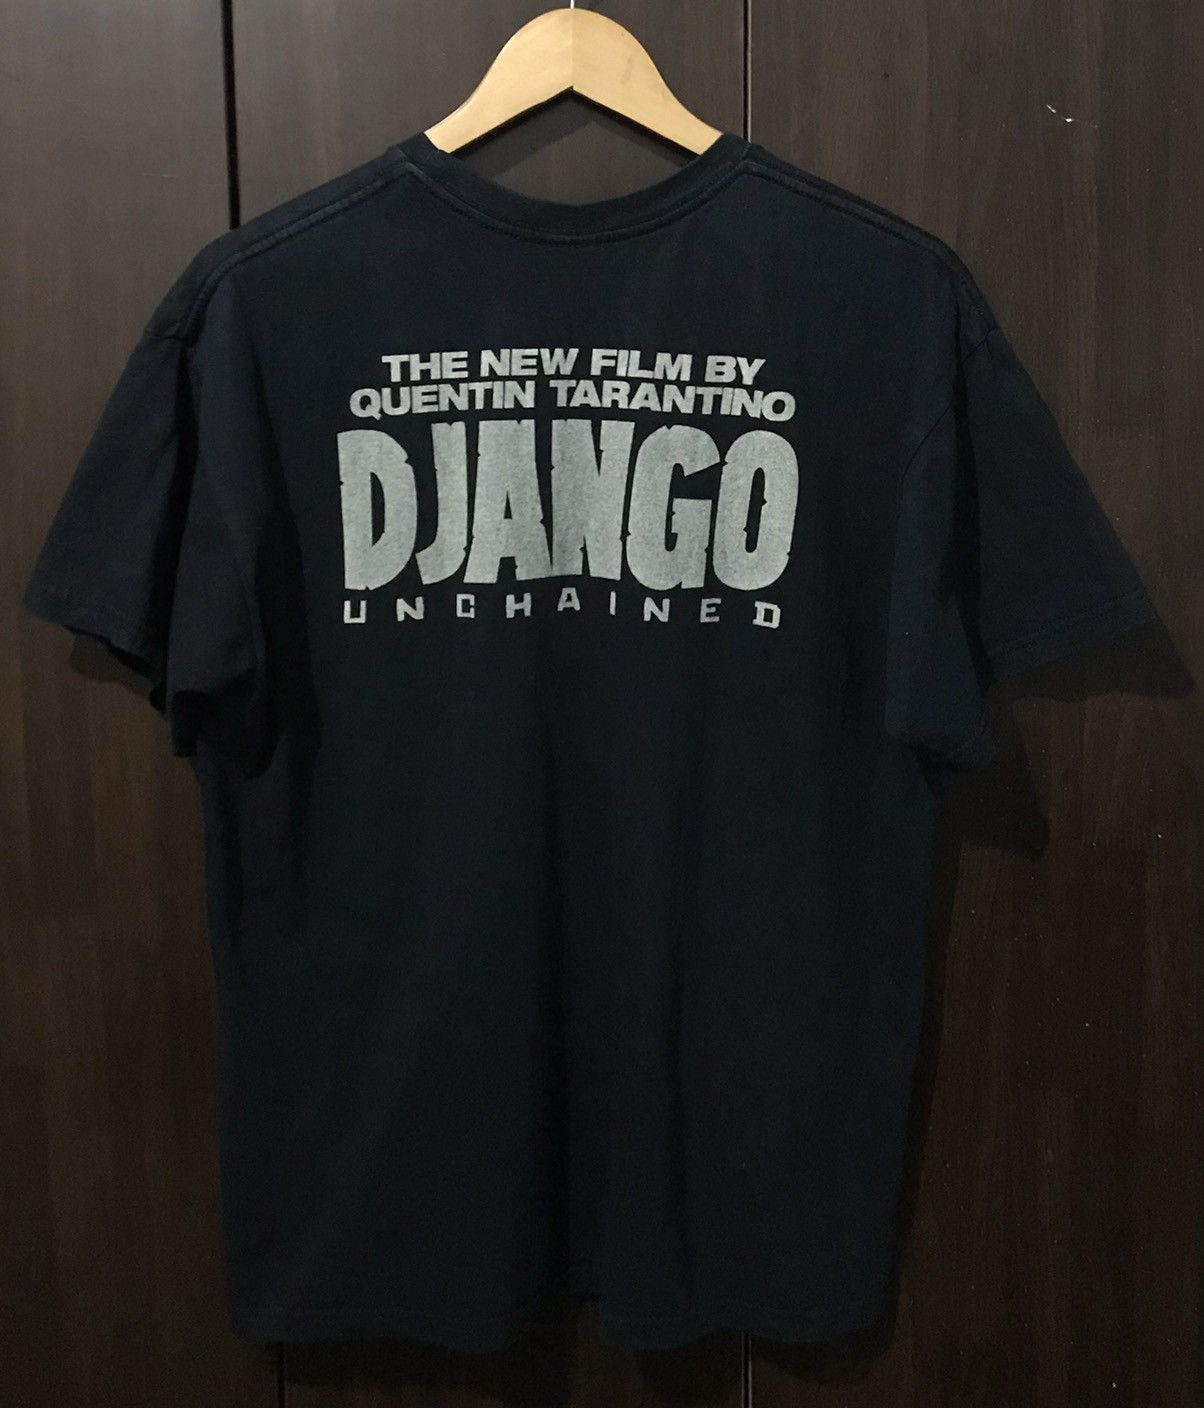 Movie 2013 DJANGO Unchained Promo Movie “not for sale” Tshirt Size US XL / EU 56 / 4 - 5 Thumbnail